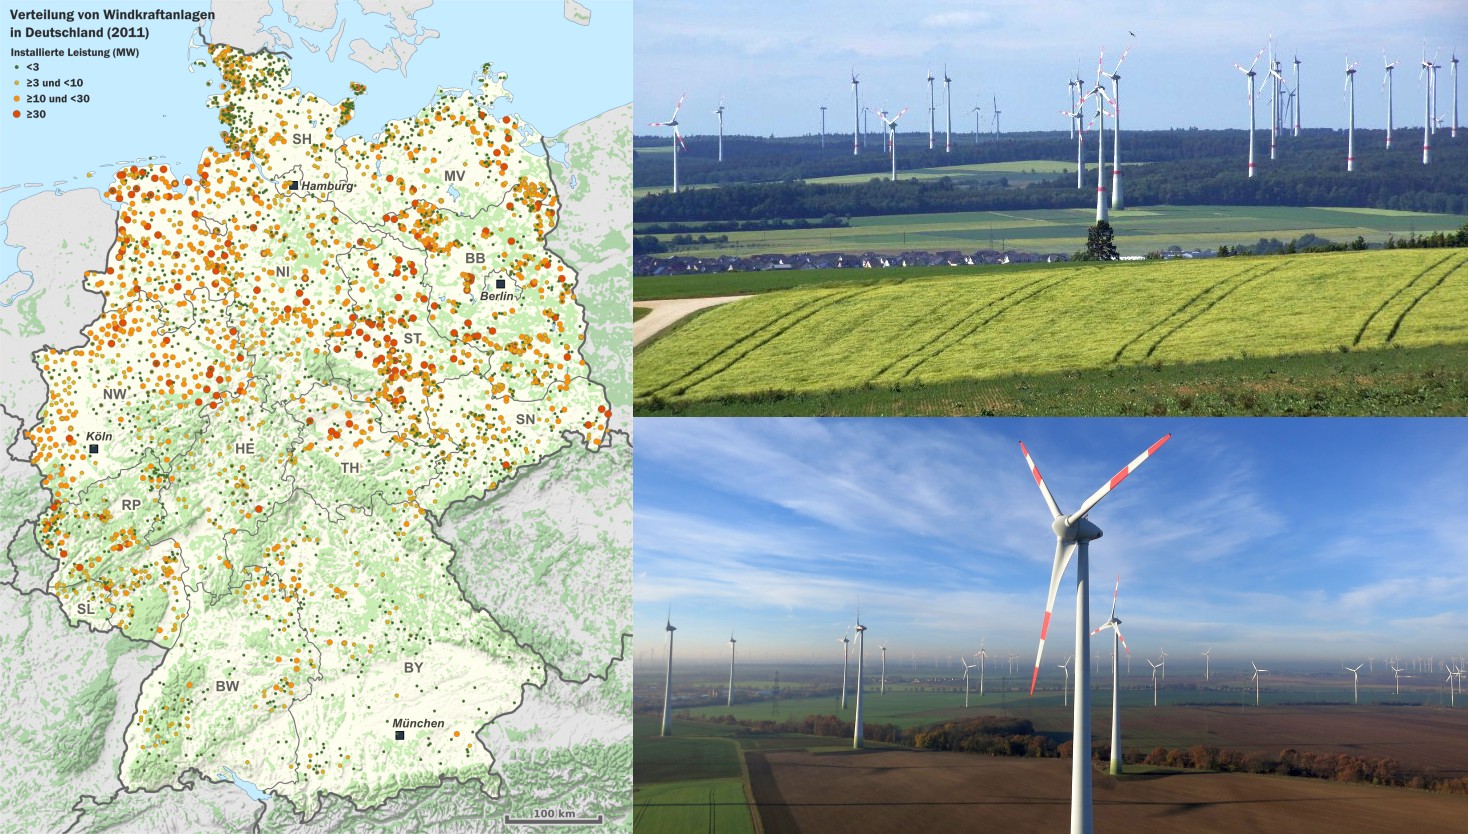 Germany Energiewende wind power landscape holocaust